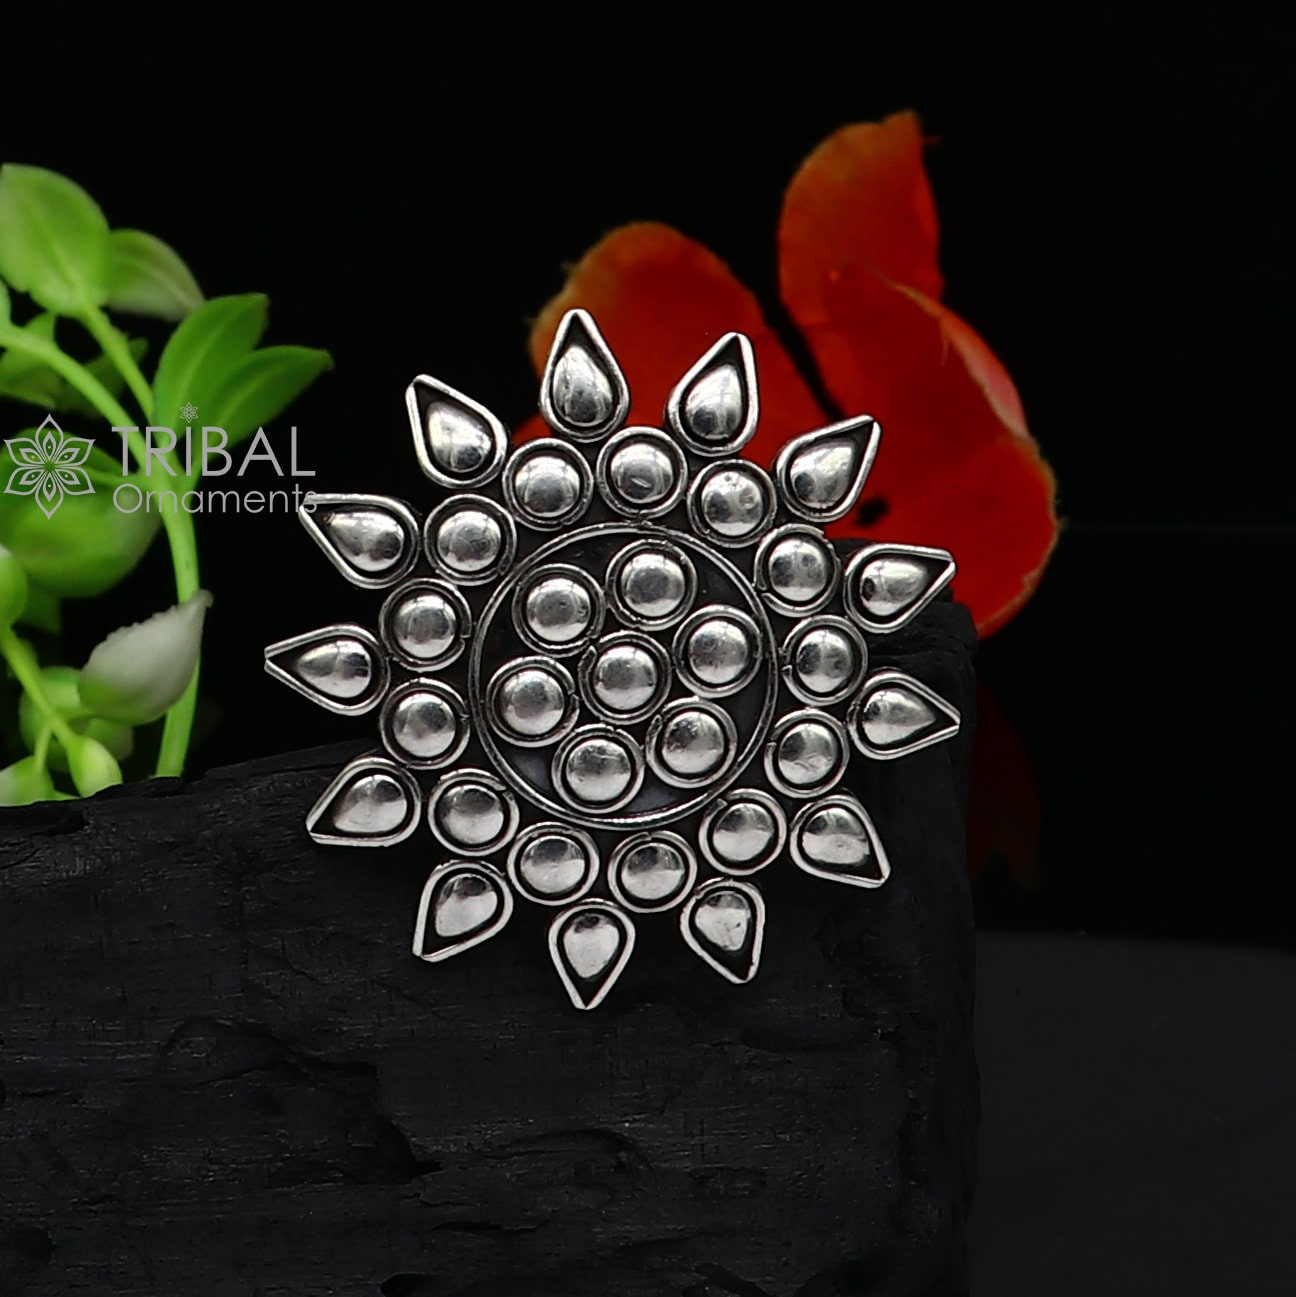 925 Sterling silver Indian Cultural handmade silver vintage unique design adjustable ring tribal ethnic belly dance jewelry sr400 - TRIBAL ORNAMENTS